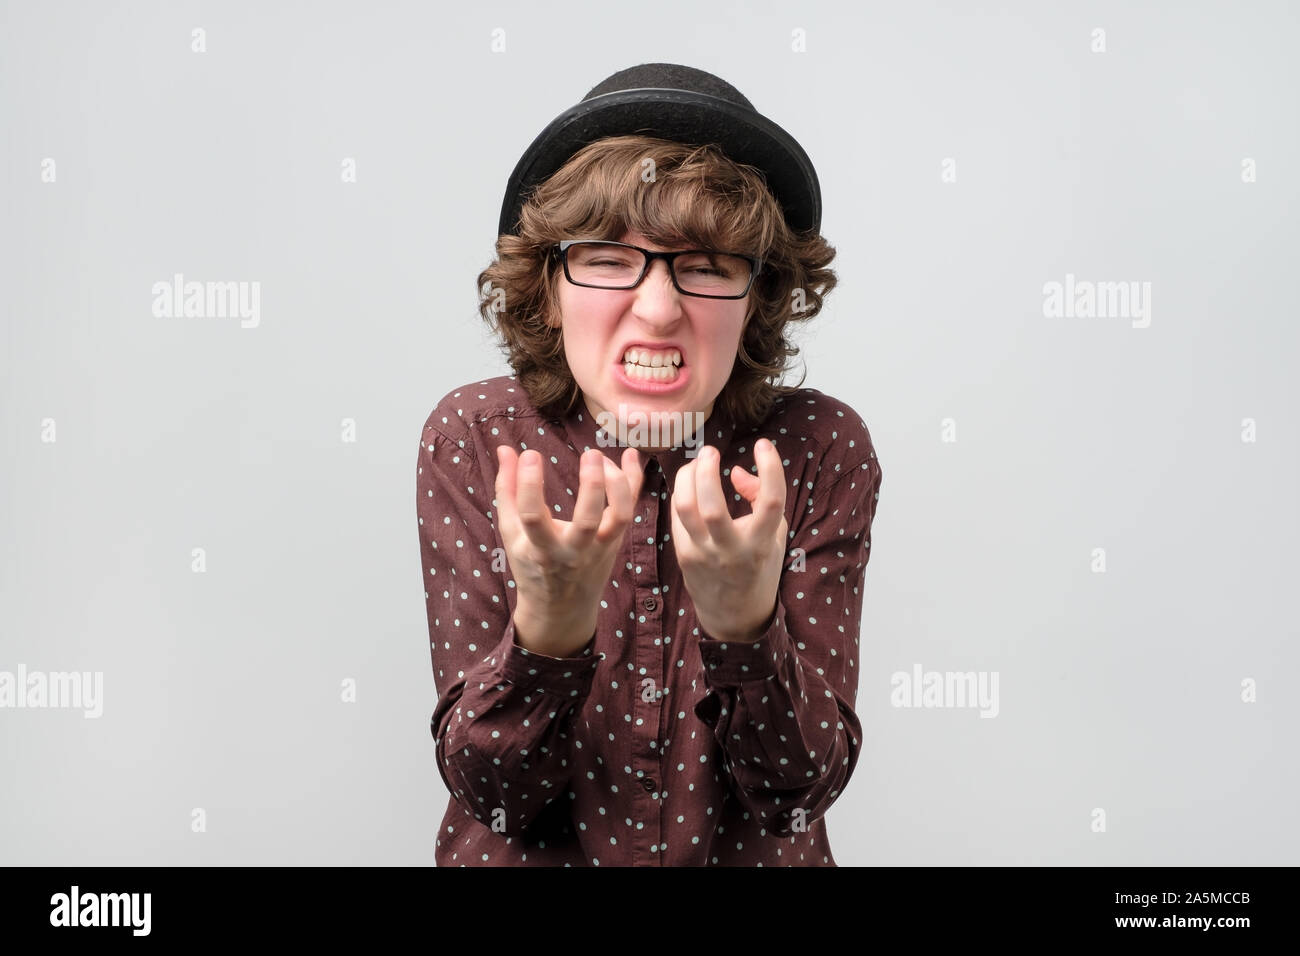 Angry caucasian woman in hat and glasses screaming Stock Photo